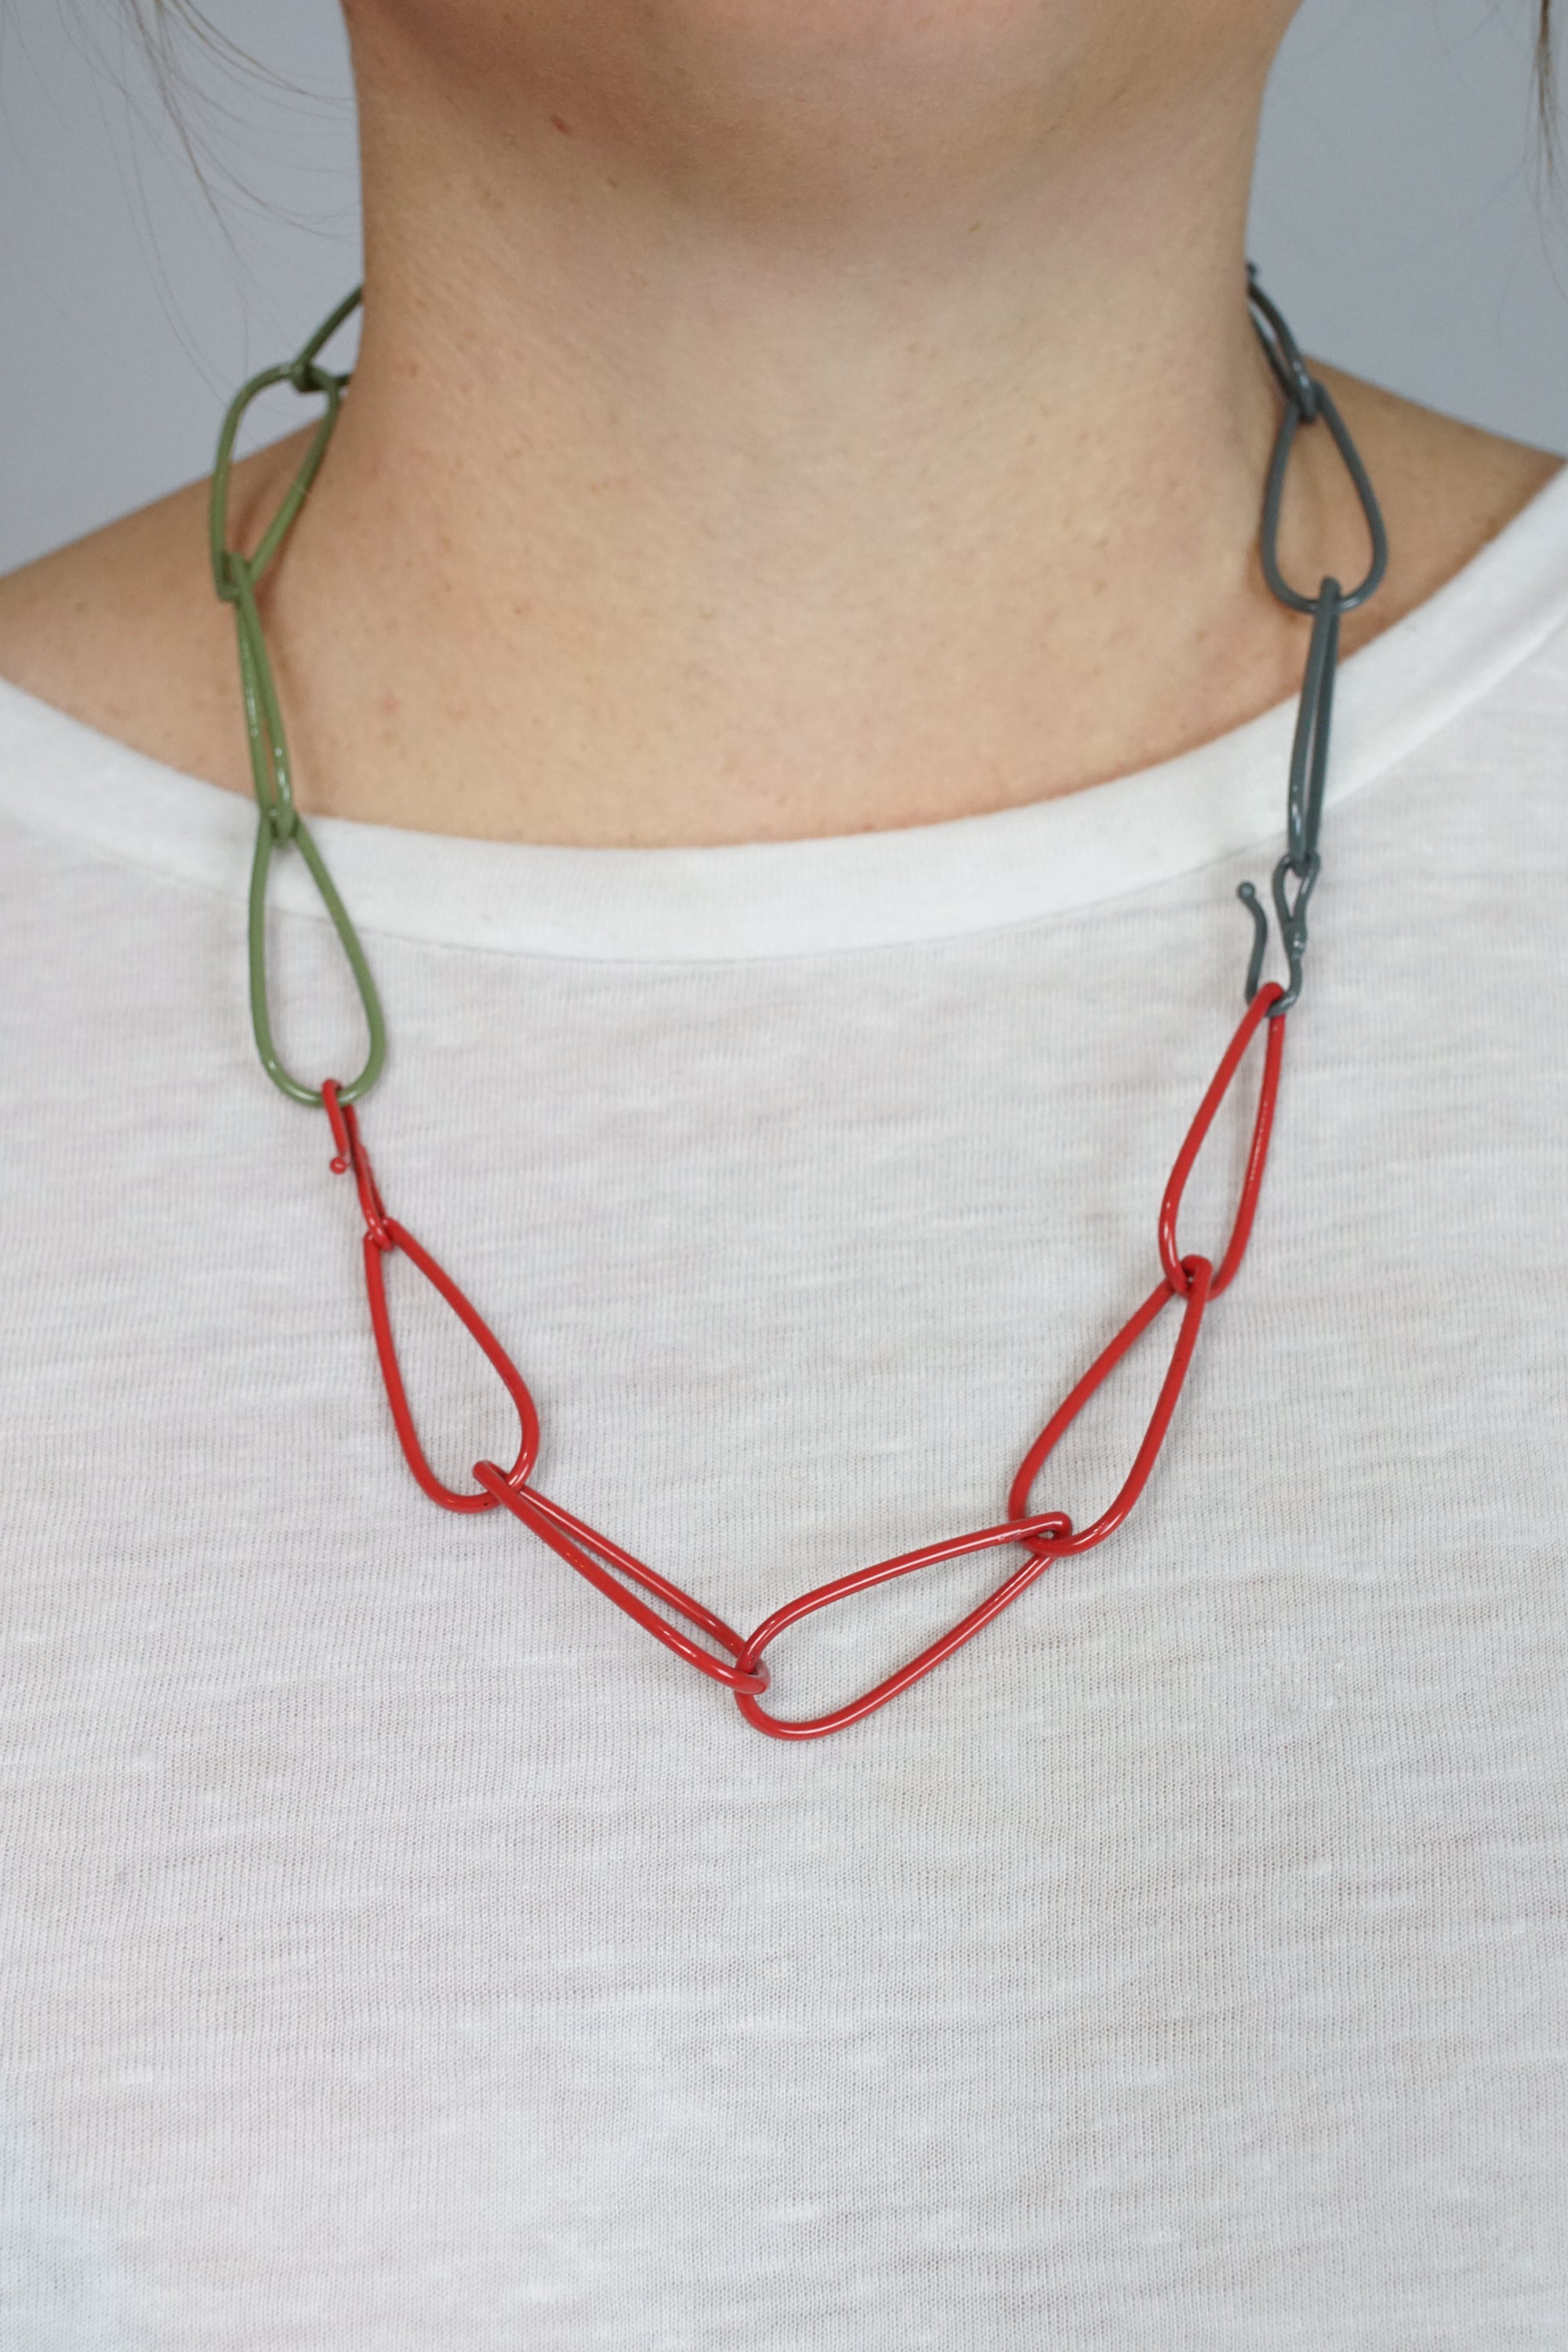 Modular Necklace in Coral Red, Storm Grey, and Olive Green